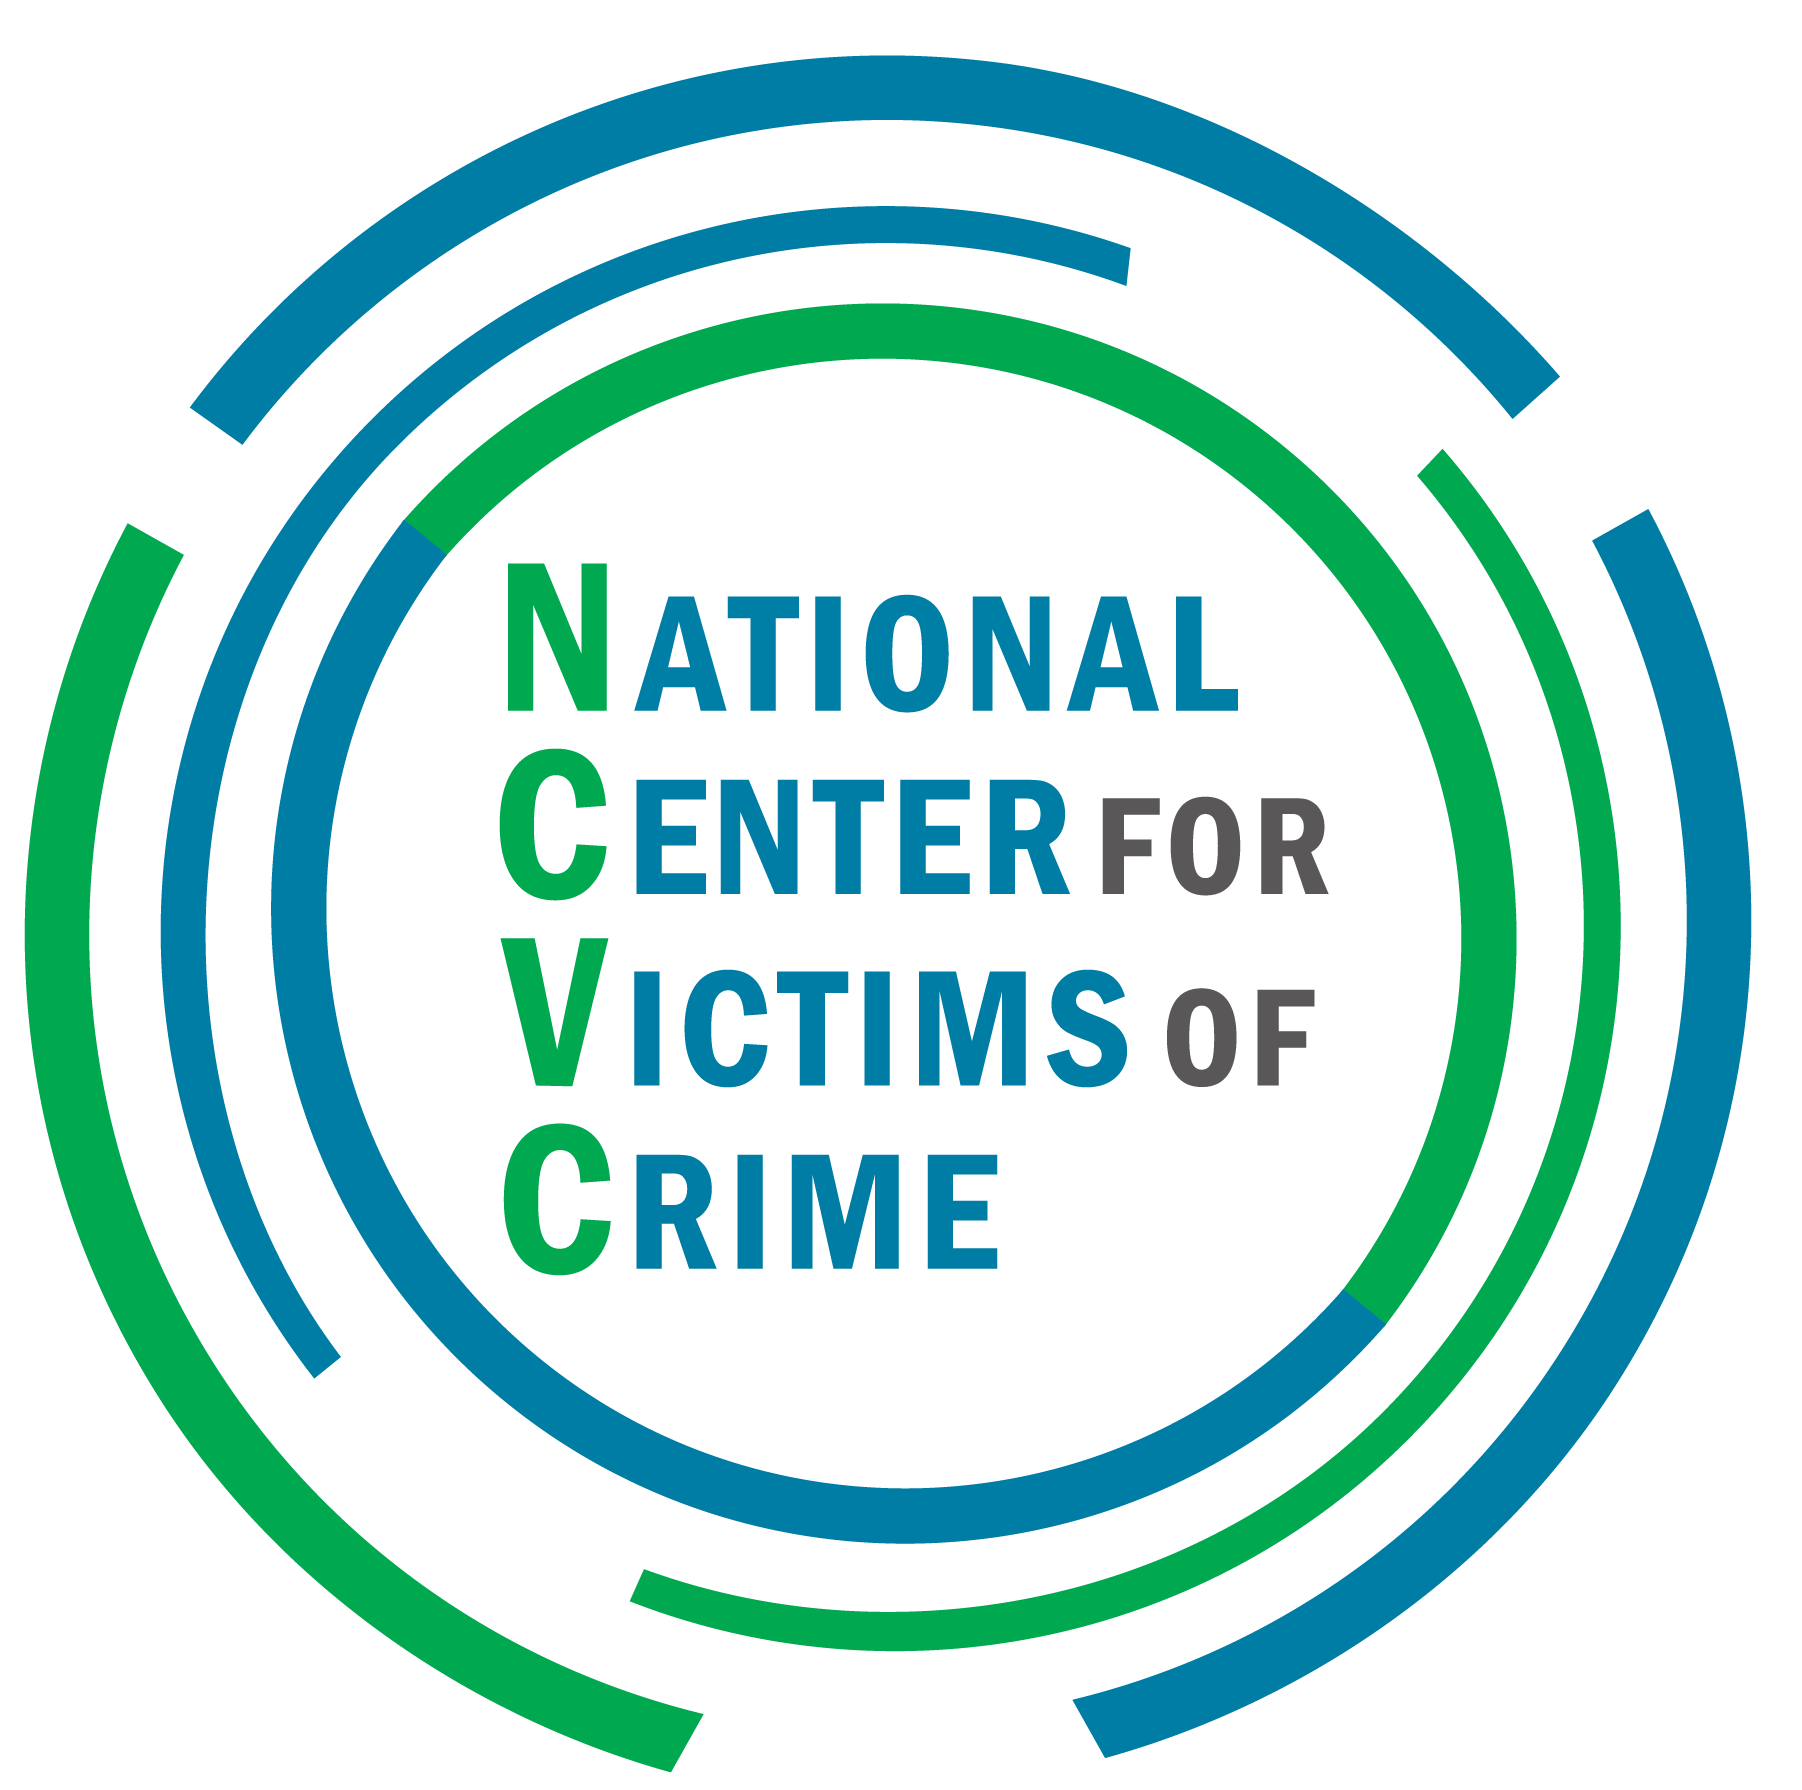 National Center for Victims of Crime Website